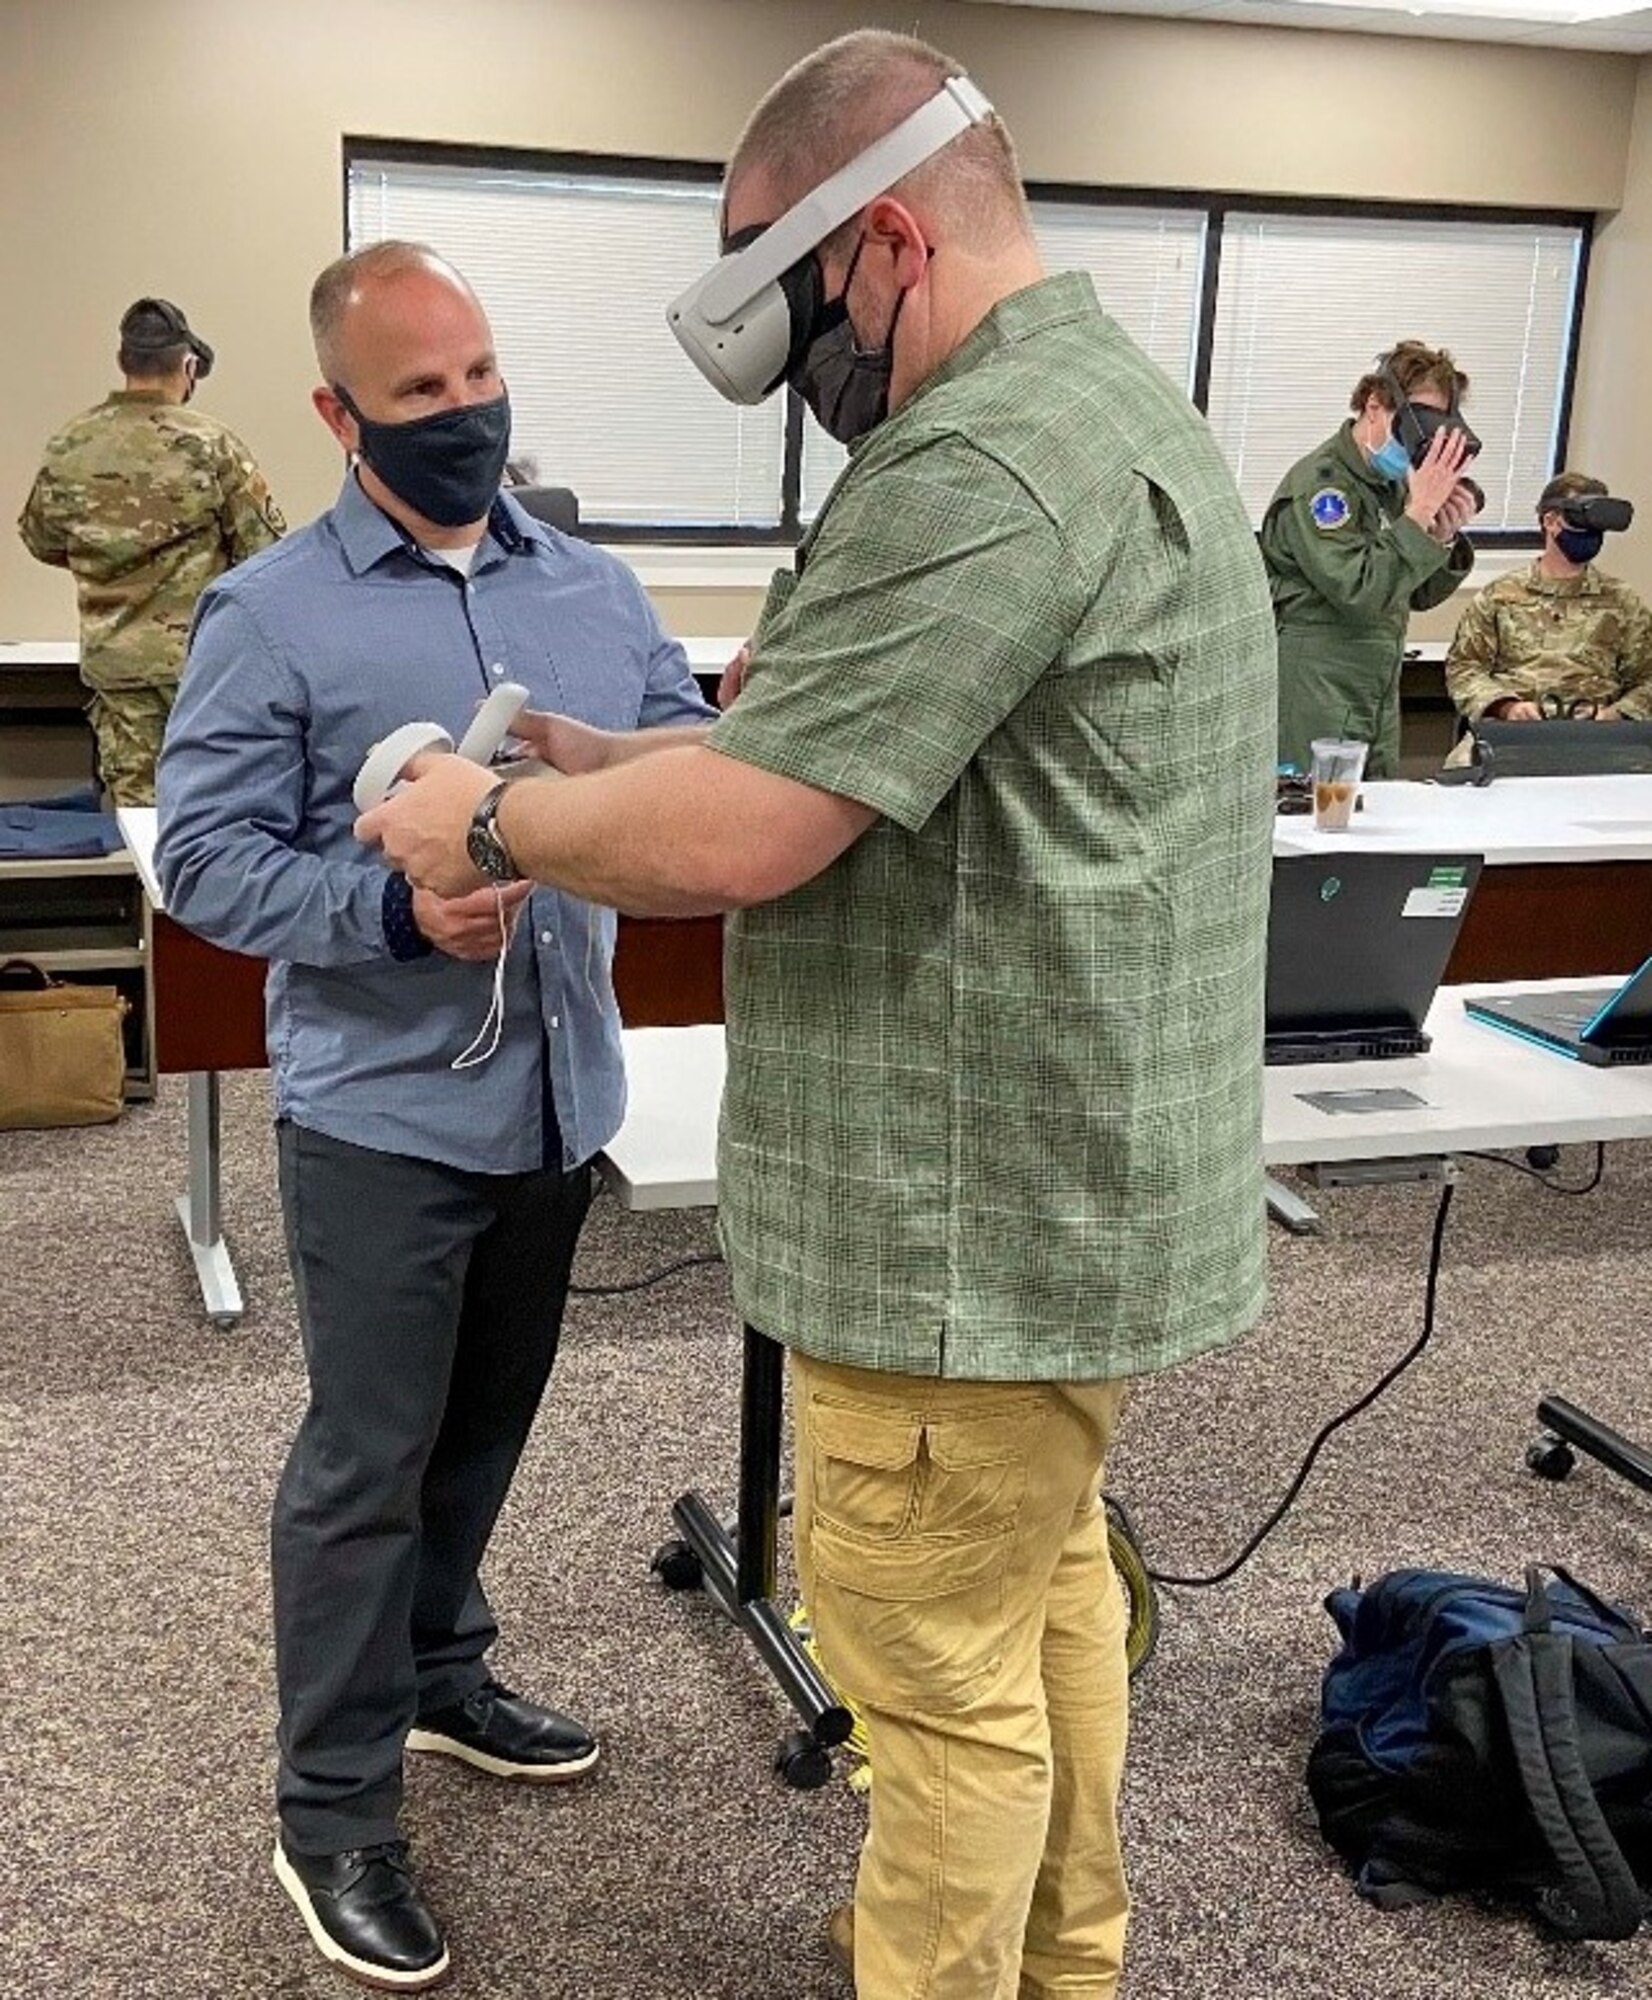 Dr. Andy Clayton, an assistant professor of leadership and augmented reality/virtual reality research task force director, helps a Regional Security Studies student during a VR trip to South America at Maxwell Air Force Base, Alabama, Mar. 29, 2021. This type of immersive learning helps students retain information from their VR experience and allows them to interact with curriculum content.